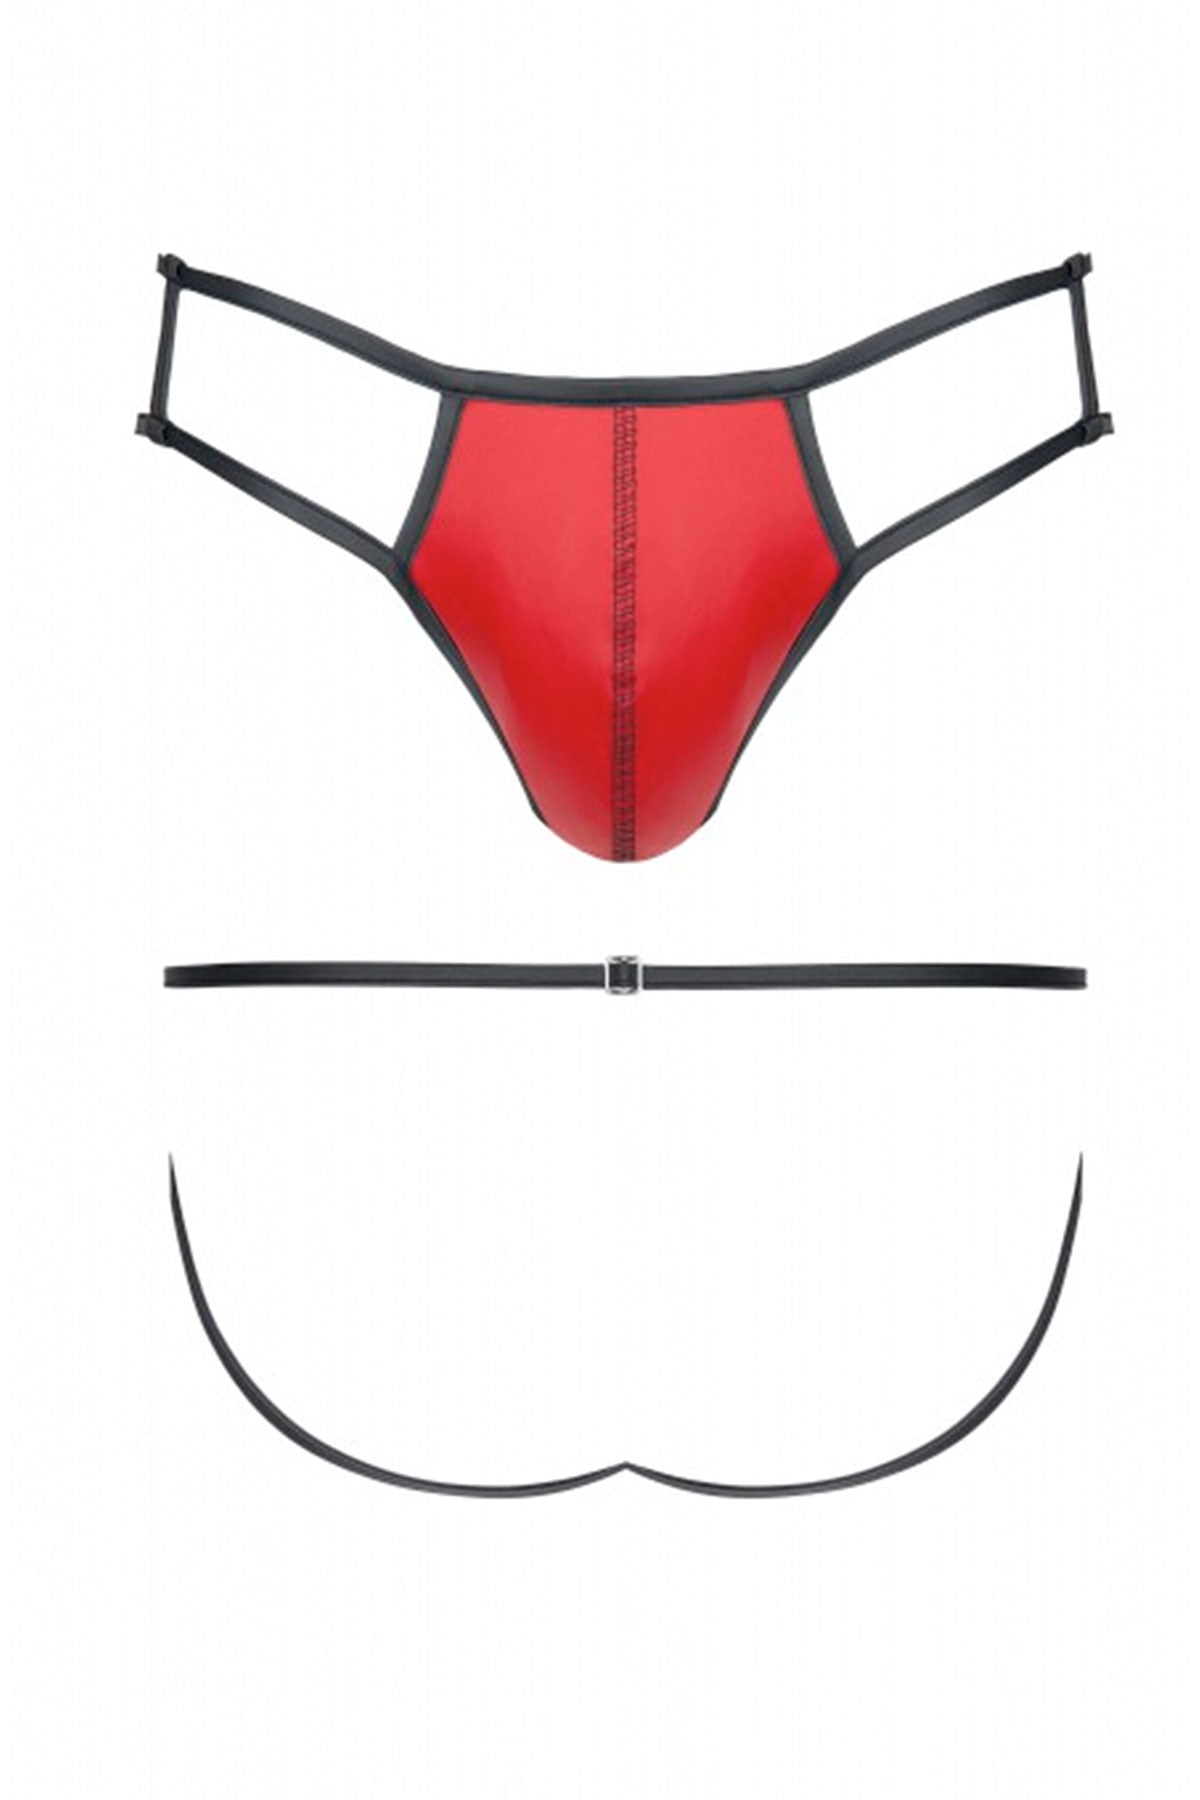 Red Backless Briefs by CRD Fetish Lingerie